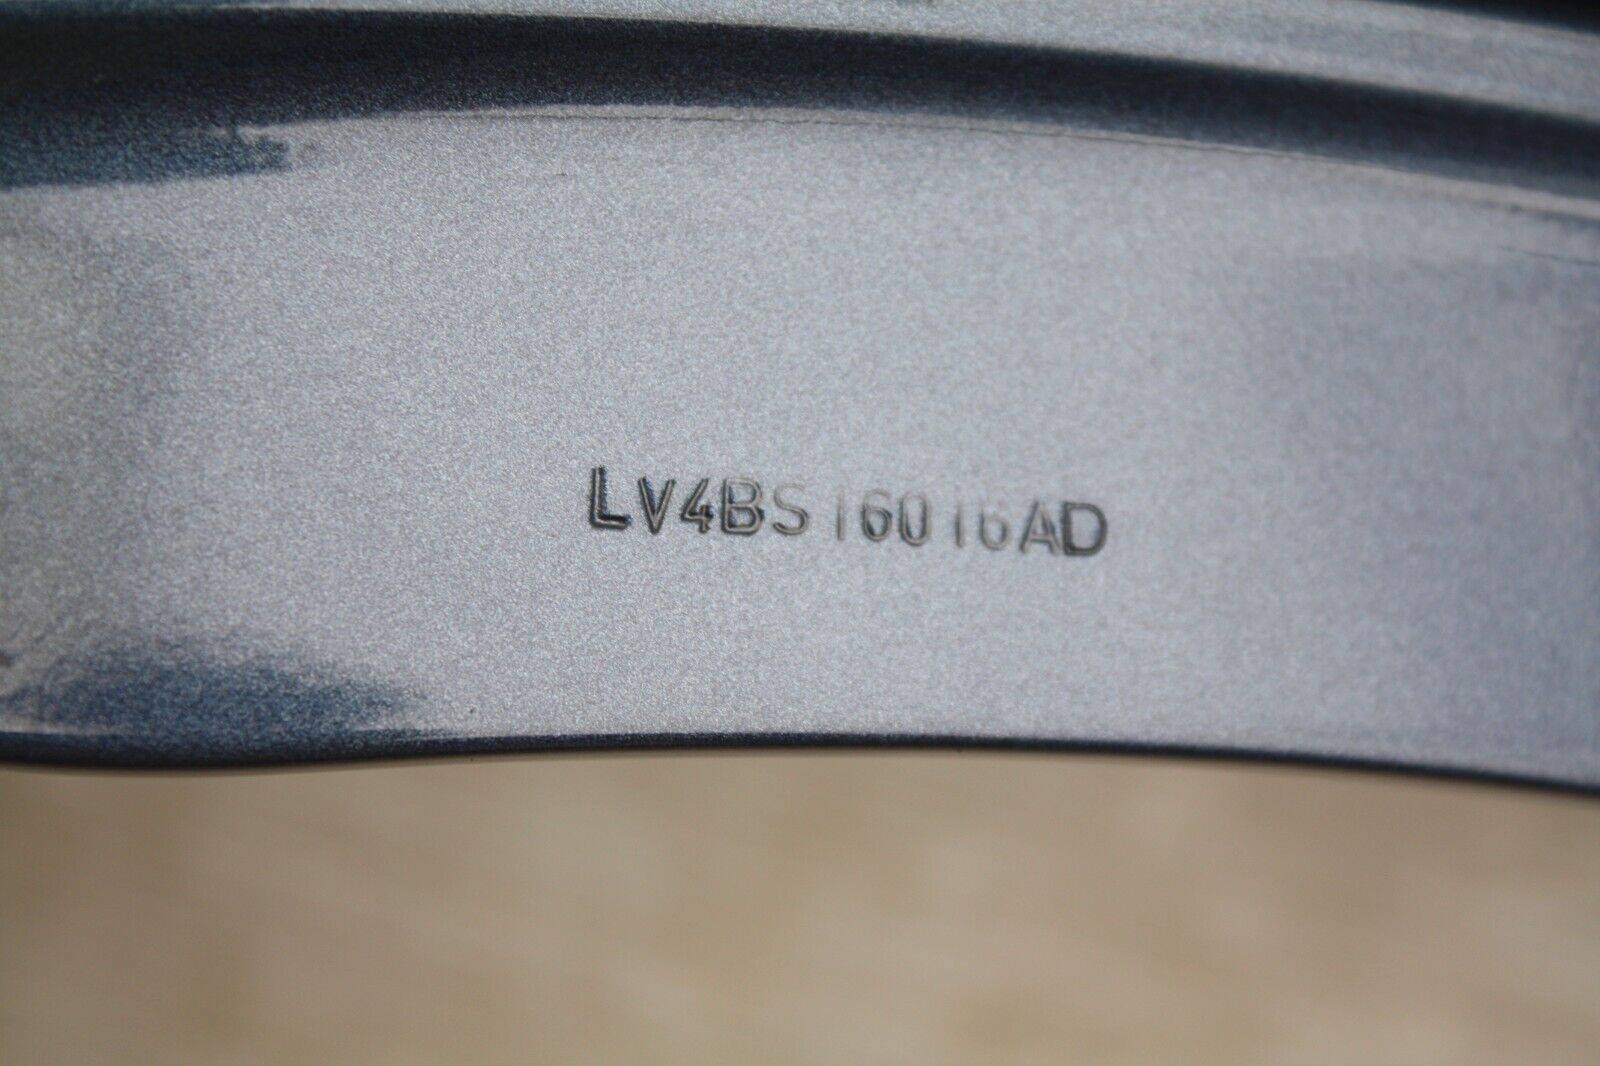 Ford-Kuga-Left-Side-Wing-2020-ON-LV4B-S16016-AD-Genuine-SEE-PICS-175952269995-8